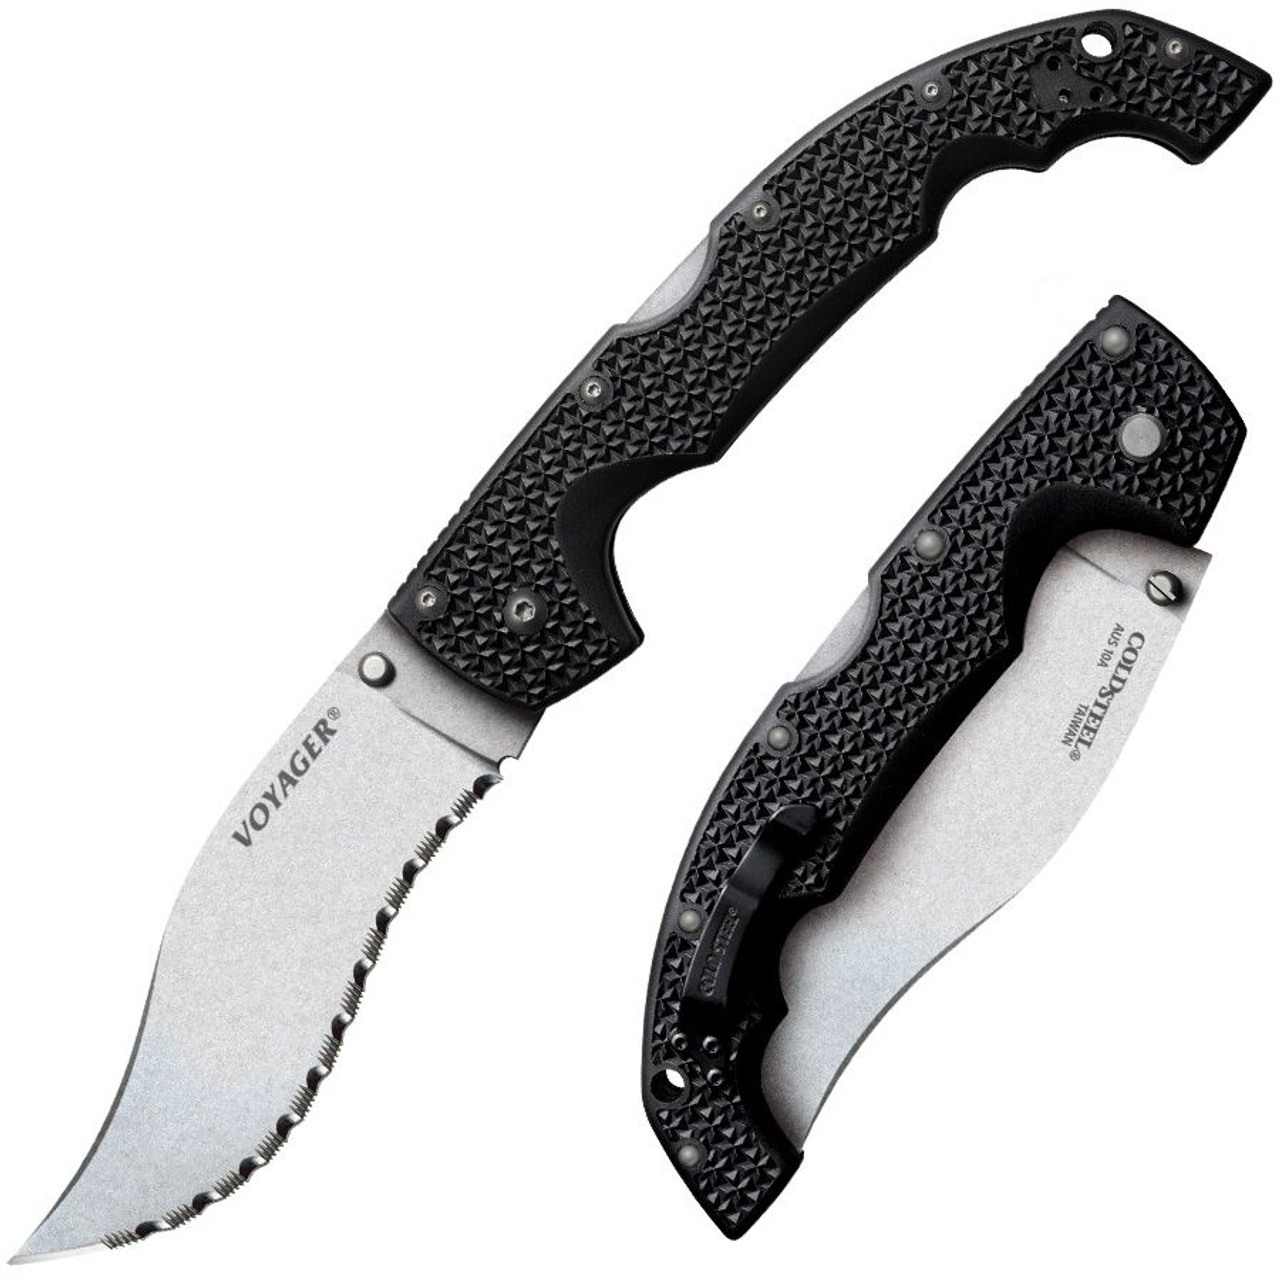 Serrated Edge Outdoor Survival Camping Hunting Knife - 2 Knives